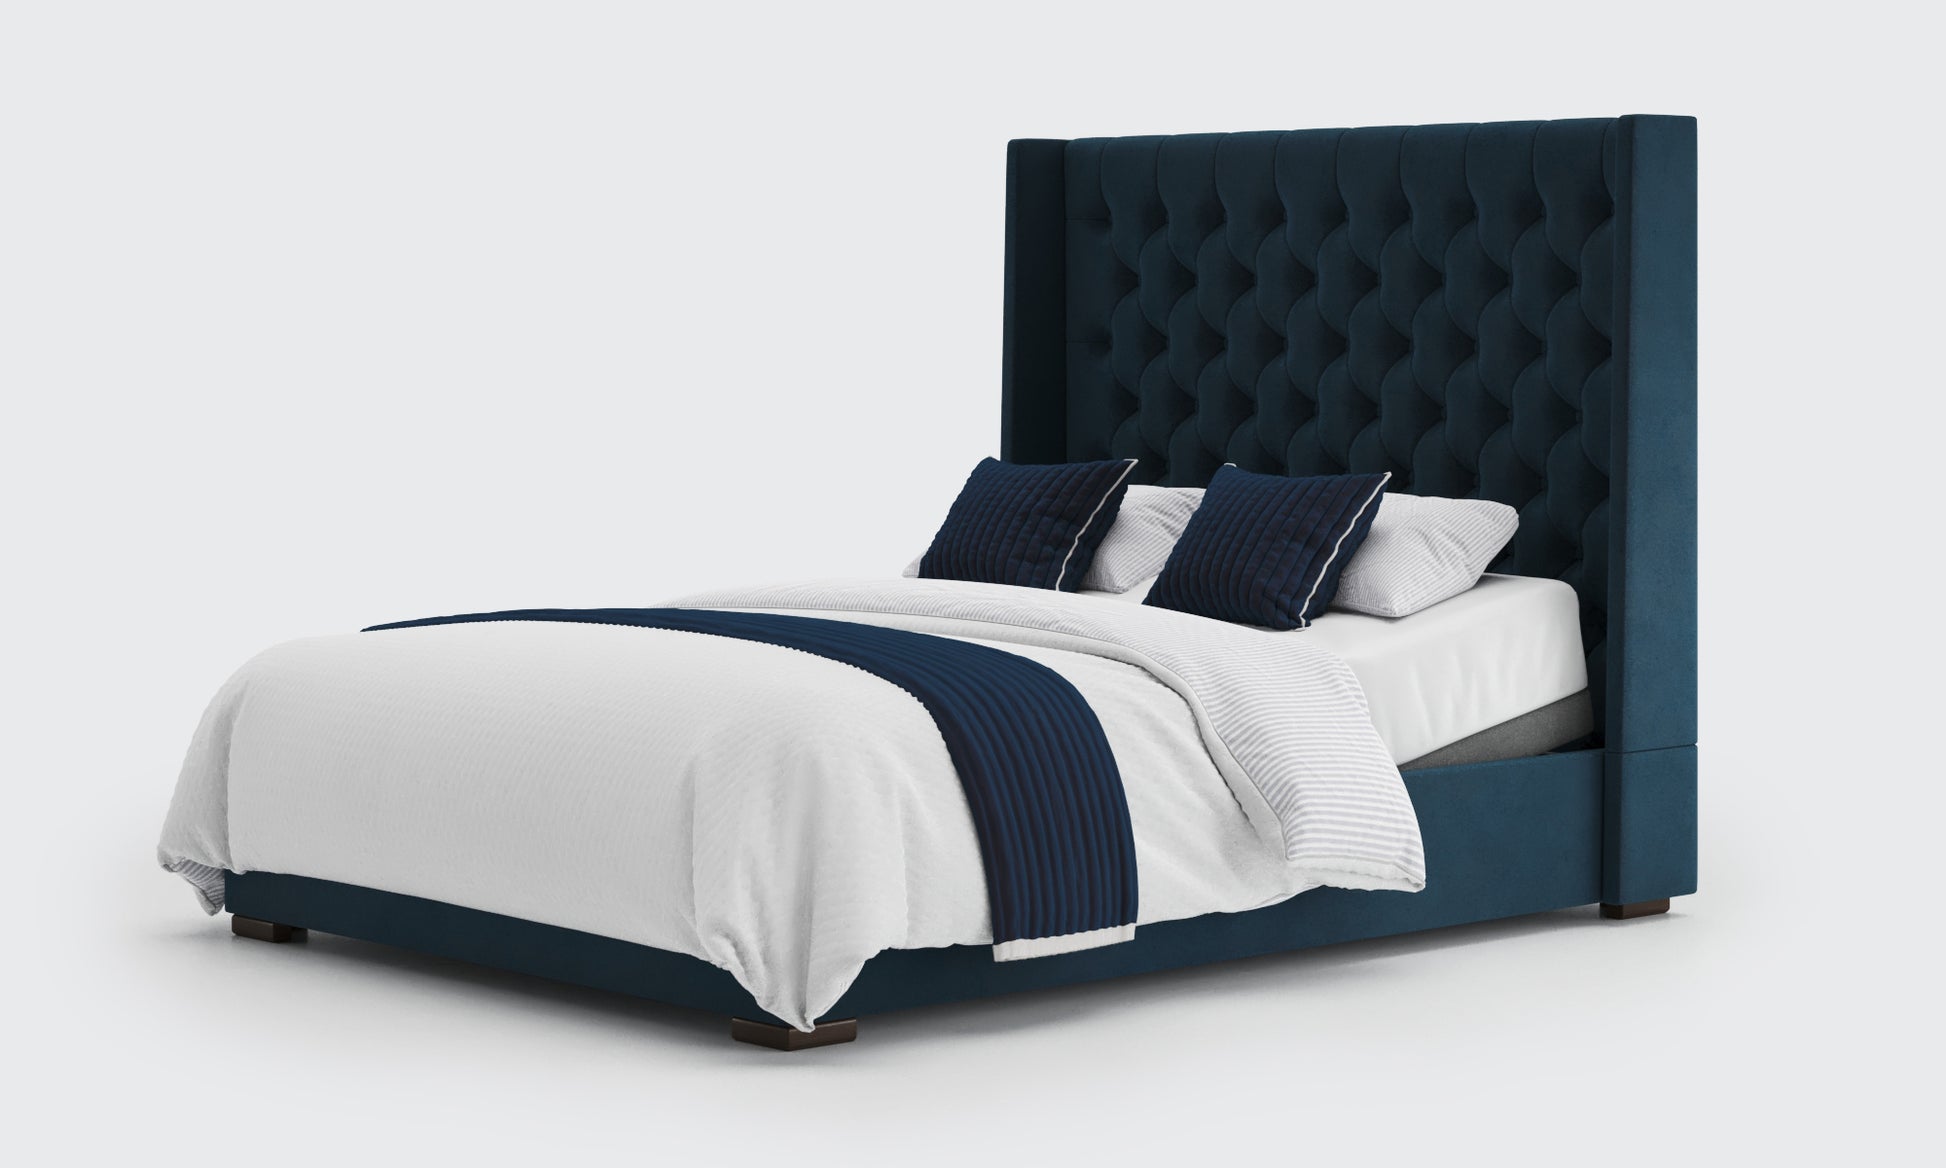 Premium adjustable 5ft double bed in the royal velvet material